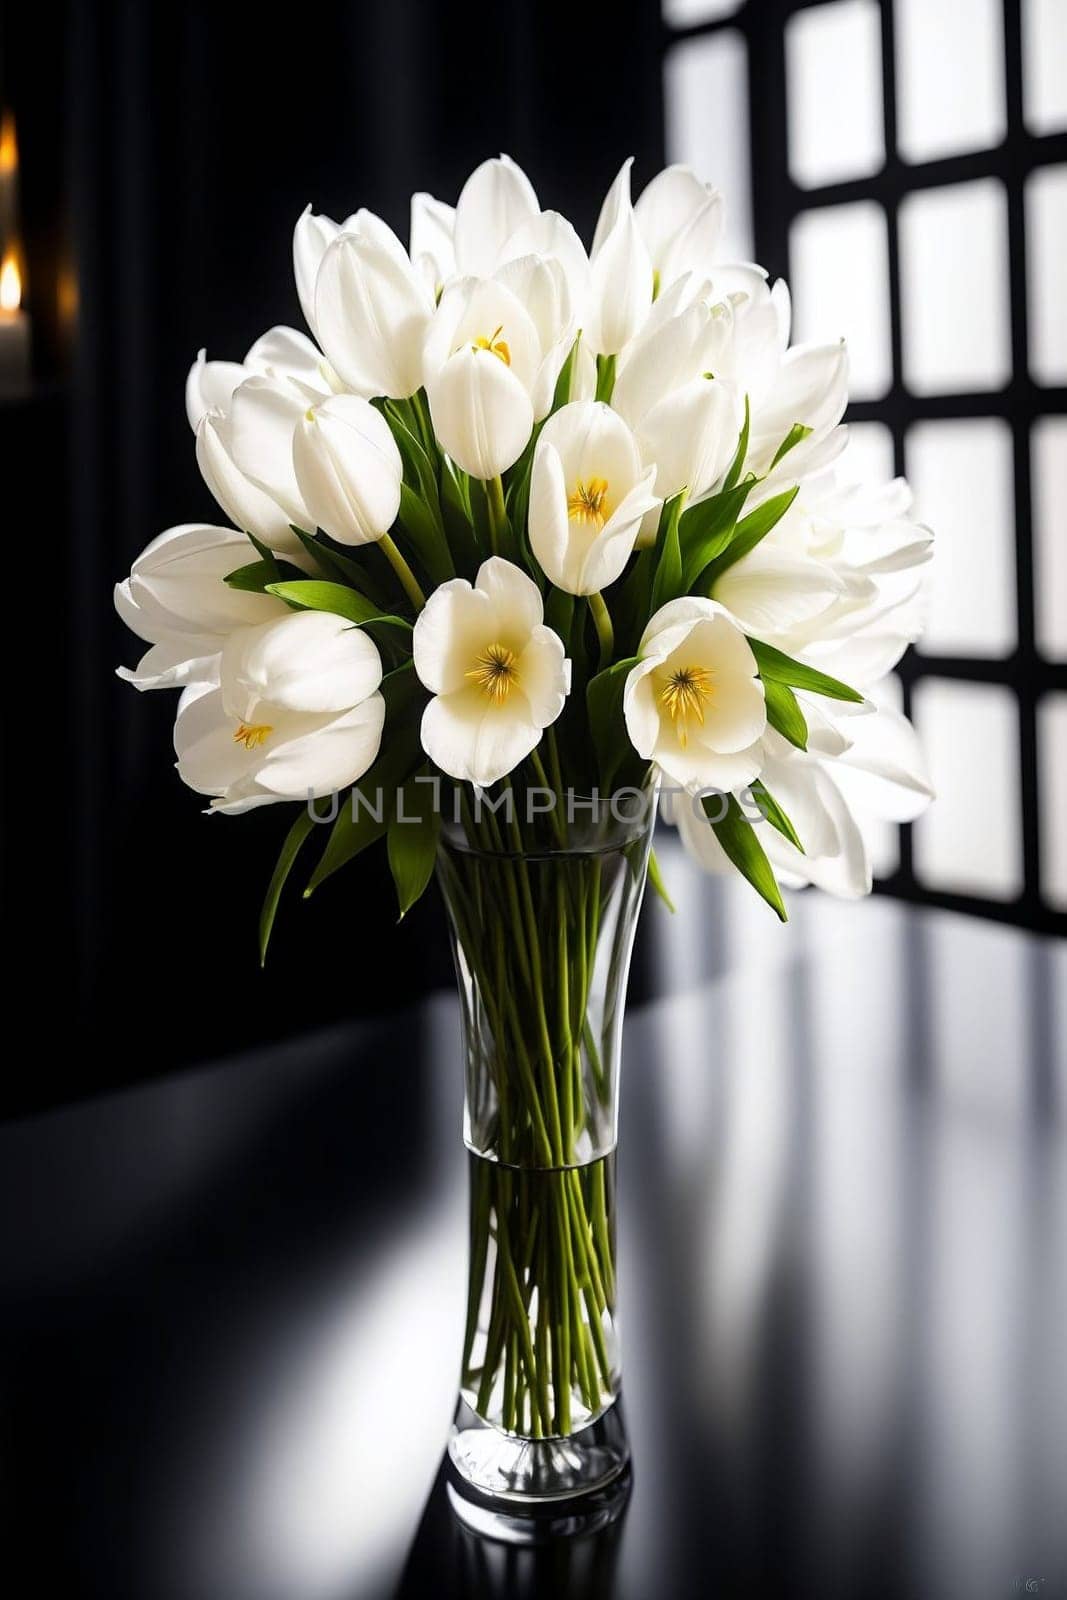 bouquet of white tulips on an abstract black and white background. by Rawlik